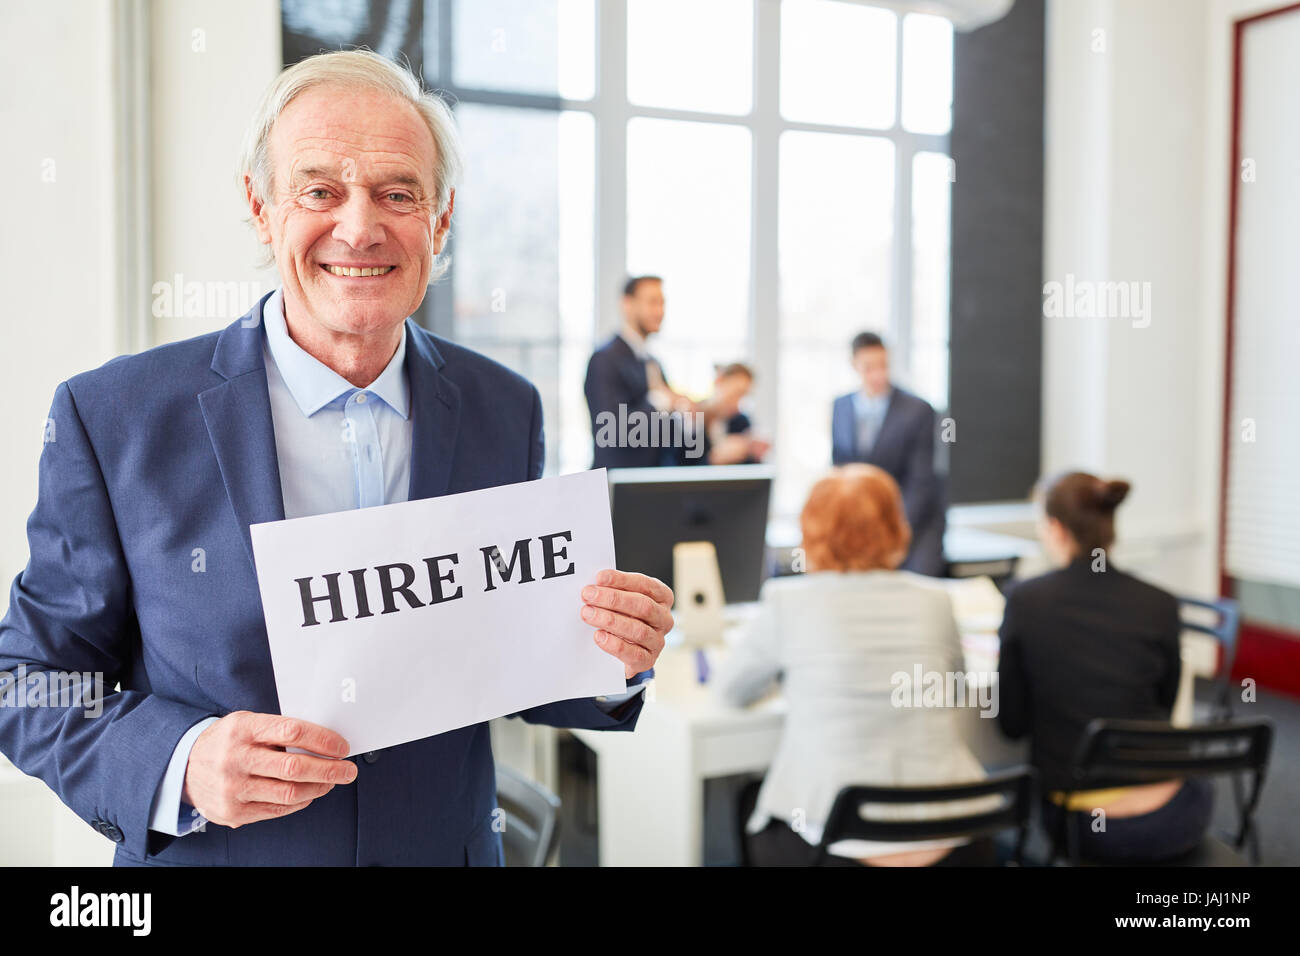 Senior businessman looking for a job holds sign that reads 'hire me' Stock Photo